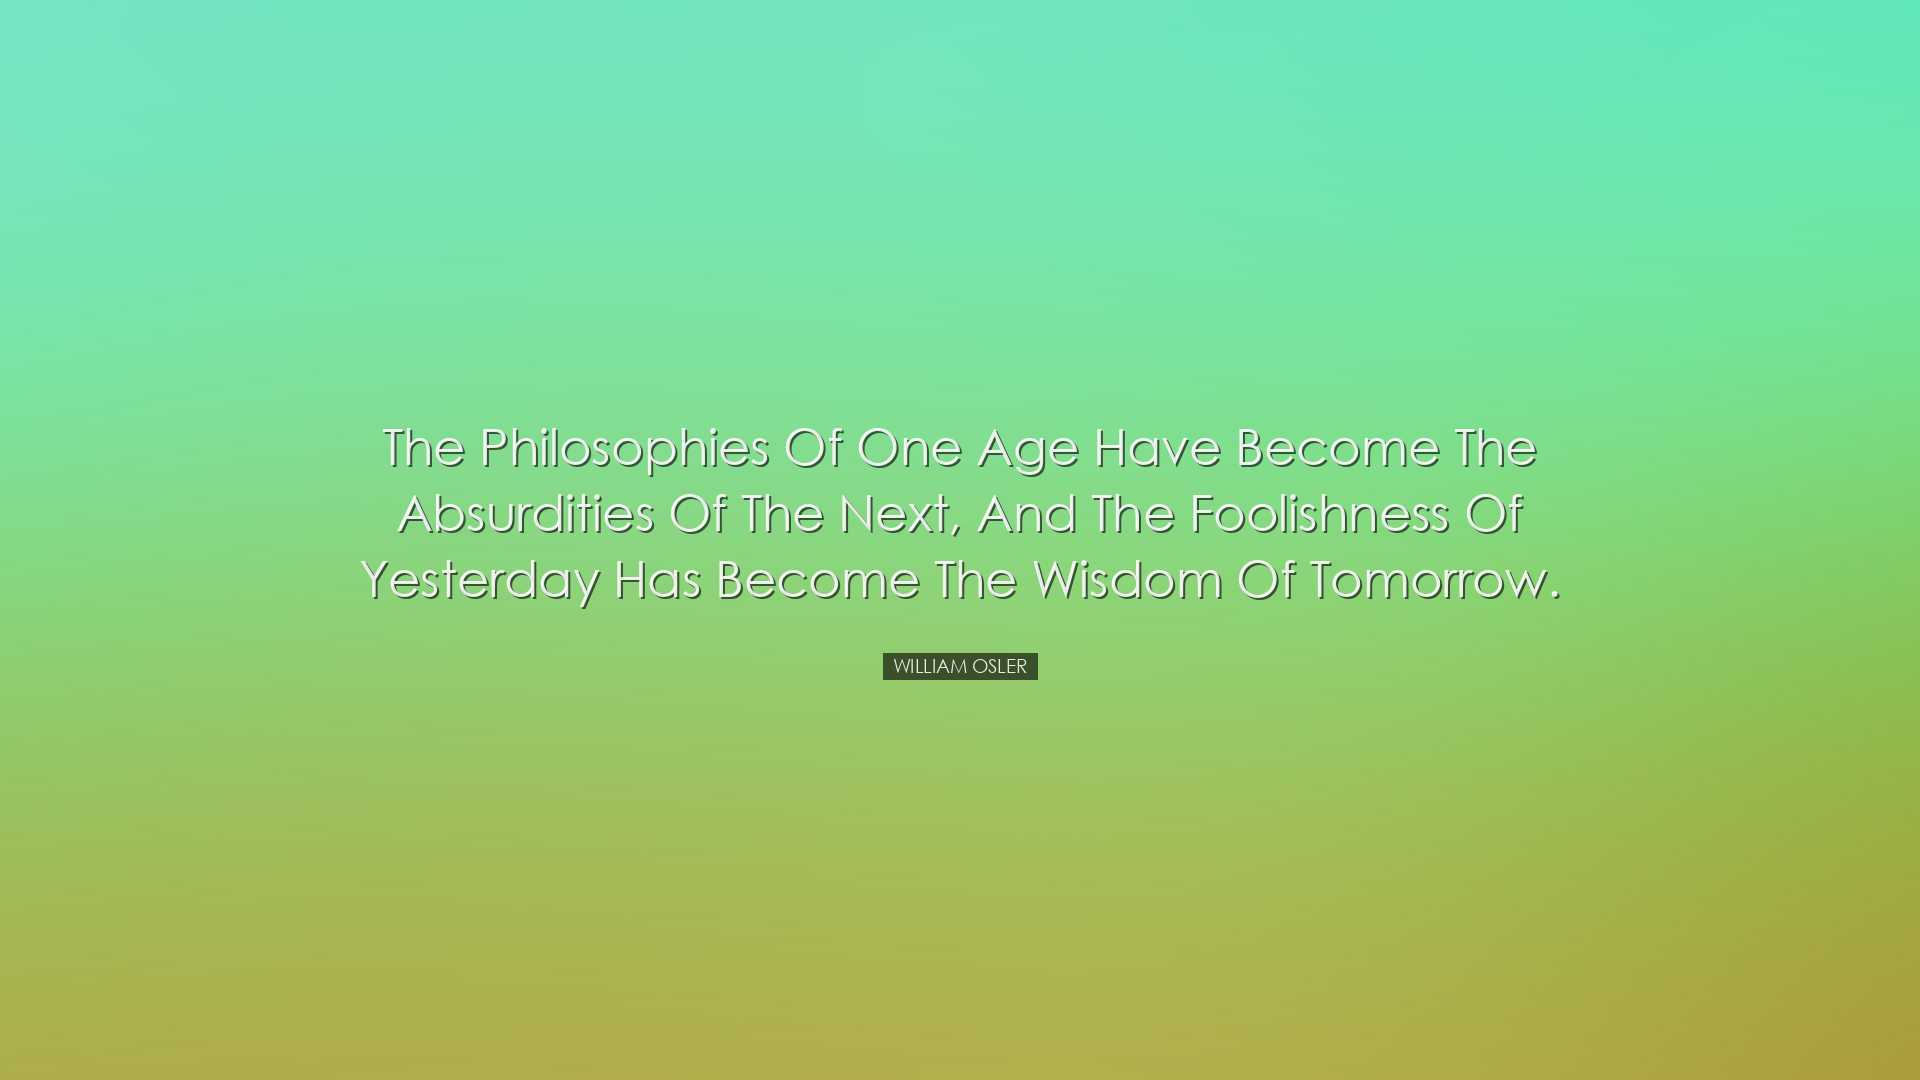 The philosophies of one age have become the absurdities of the nex